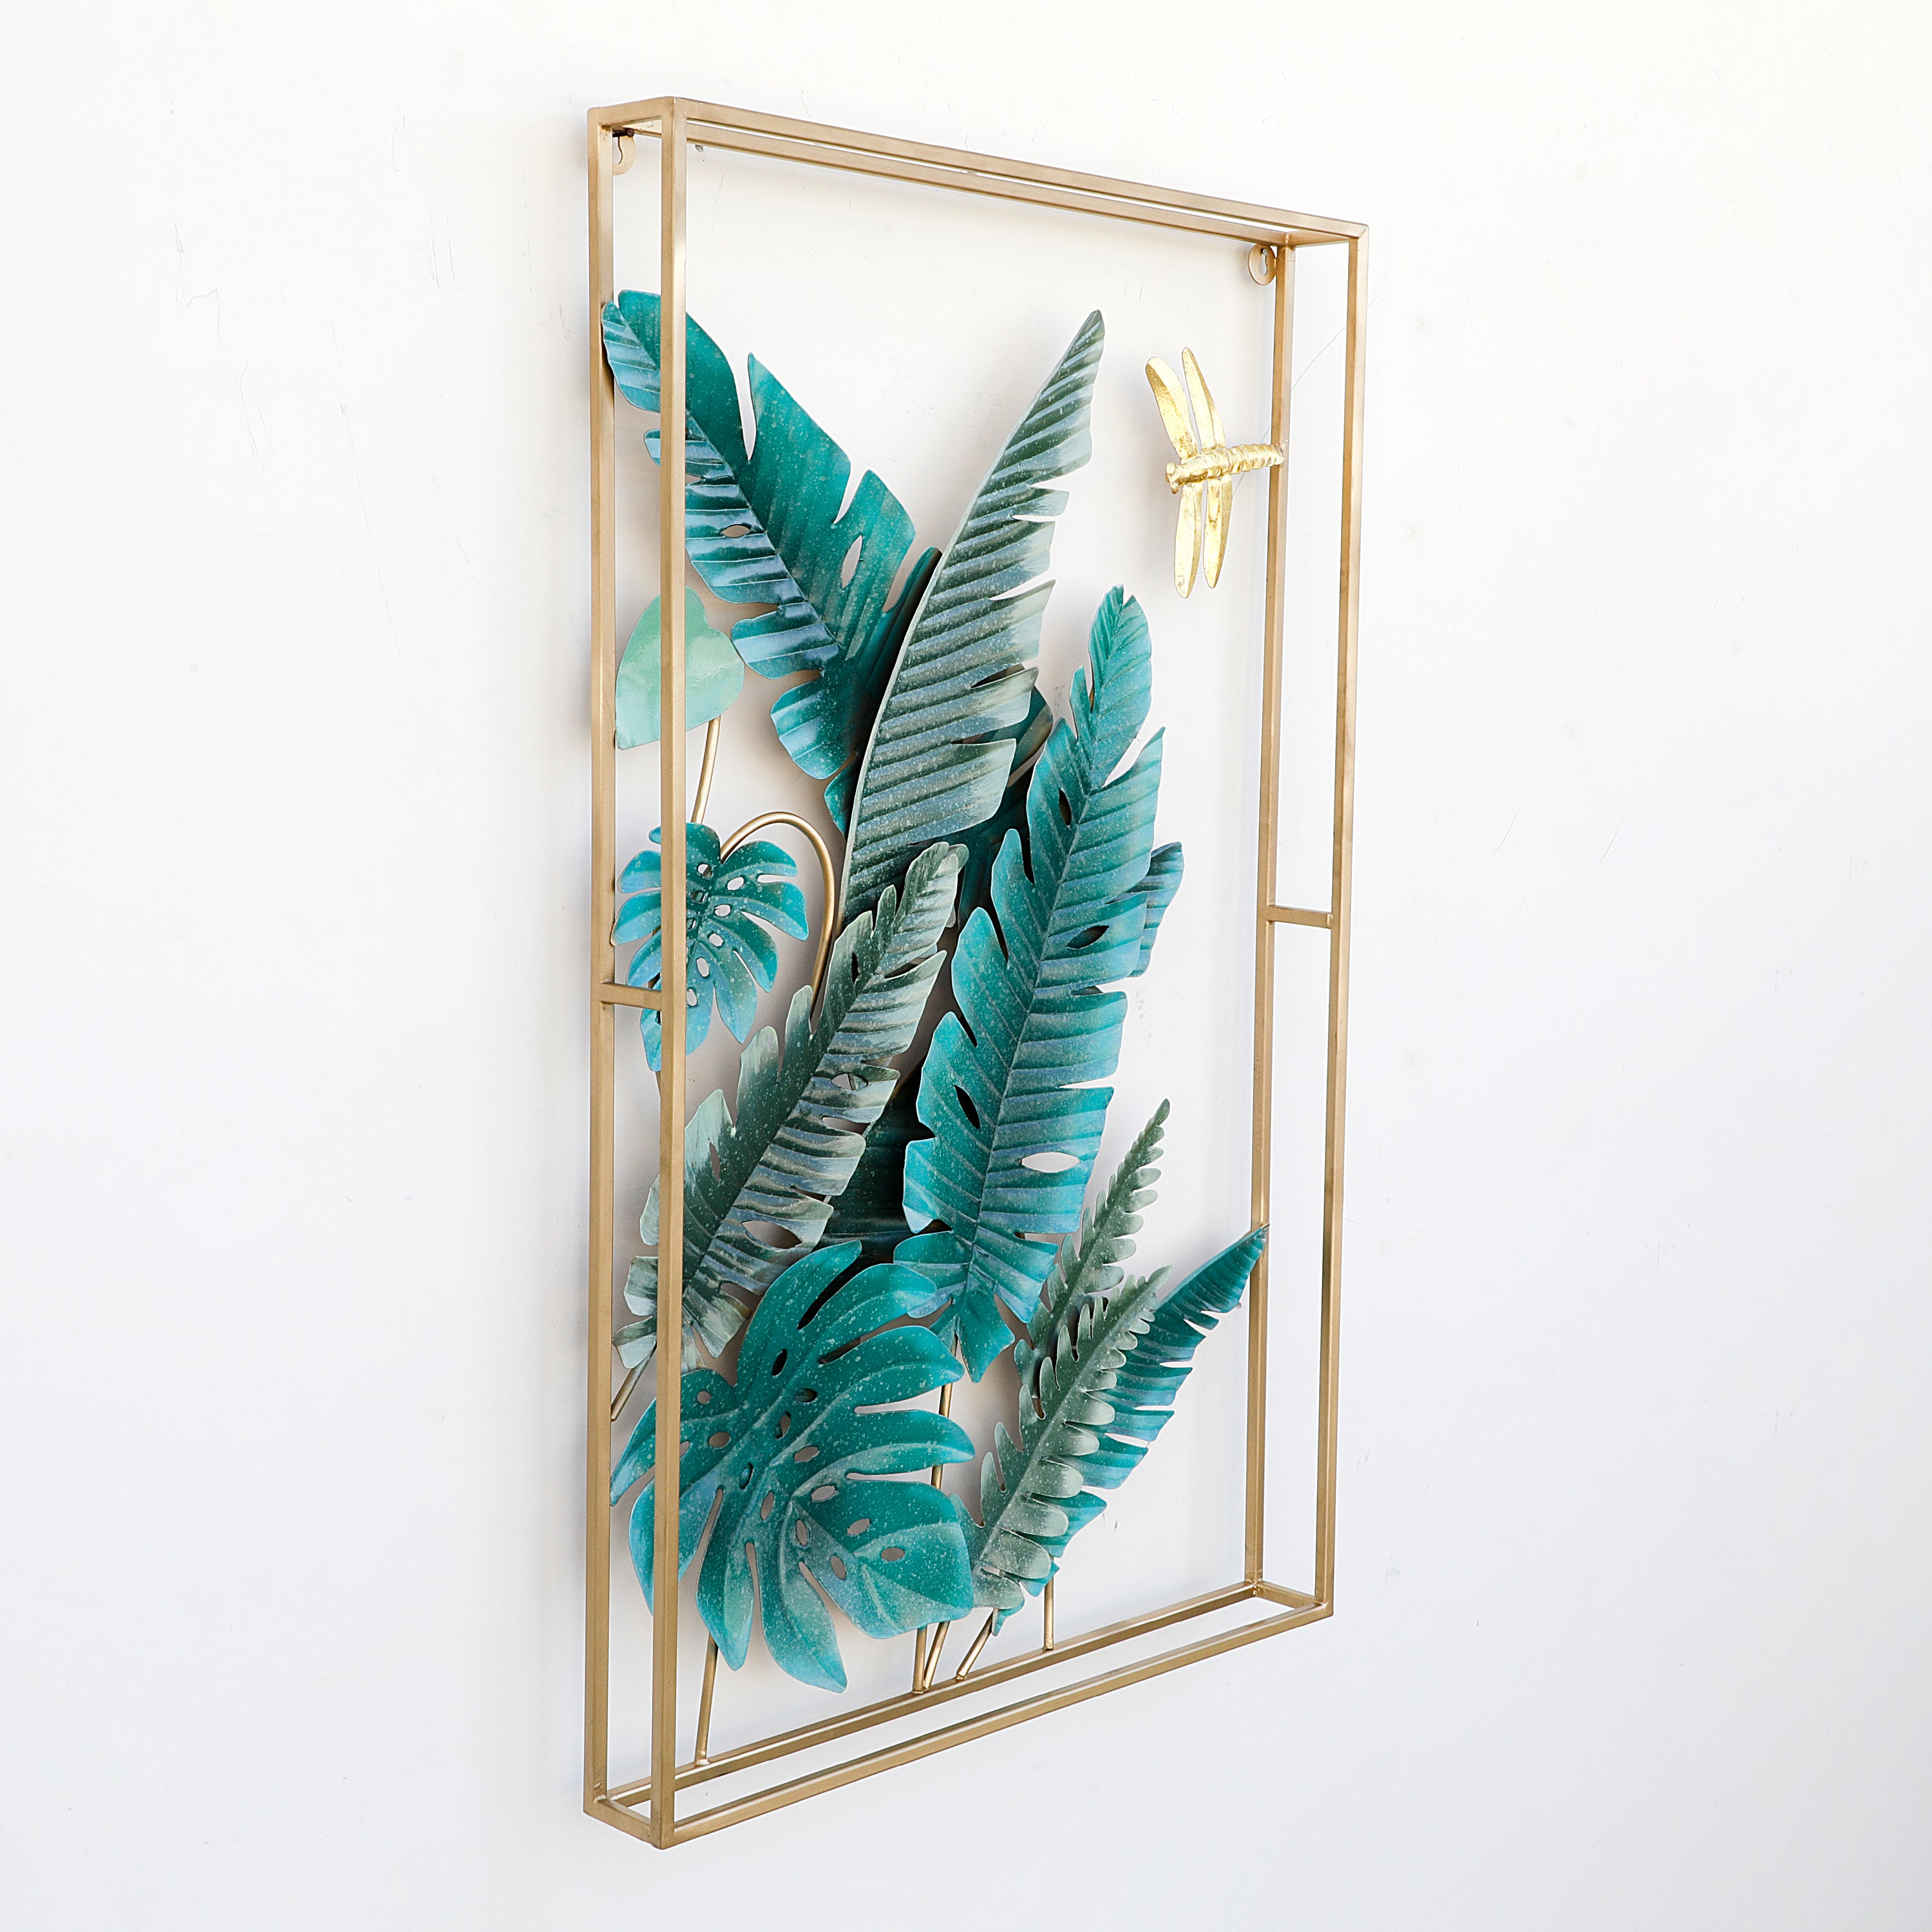 Craftter Vertical Dual Frame with Lots of Leafs Metal Wall Art for Hom -  craftter.com